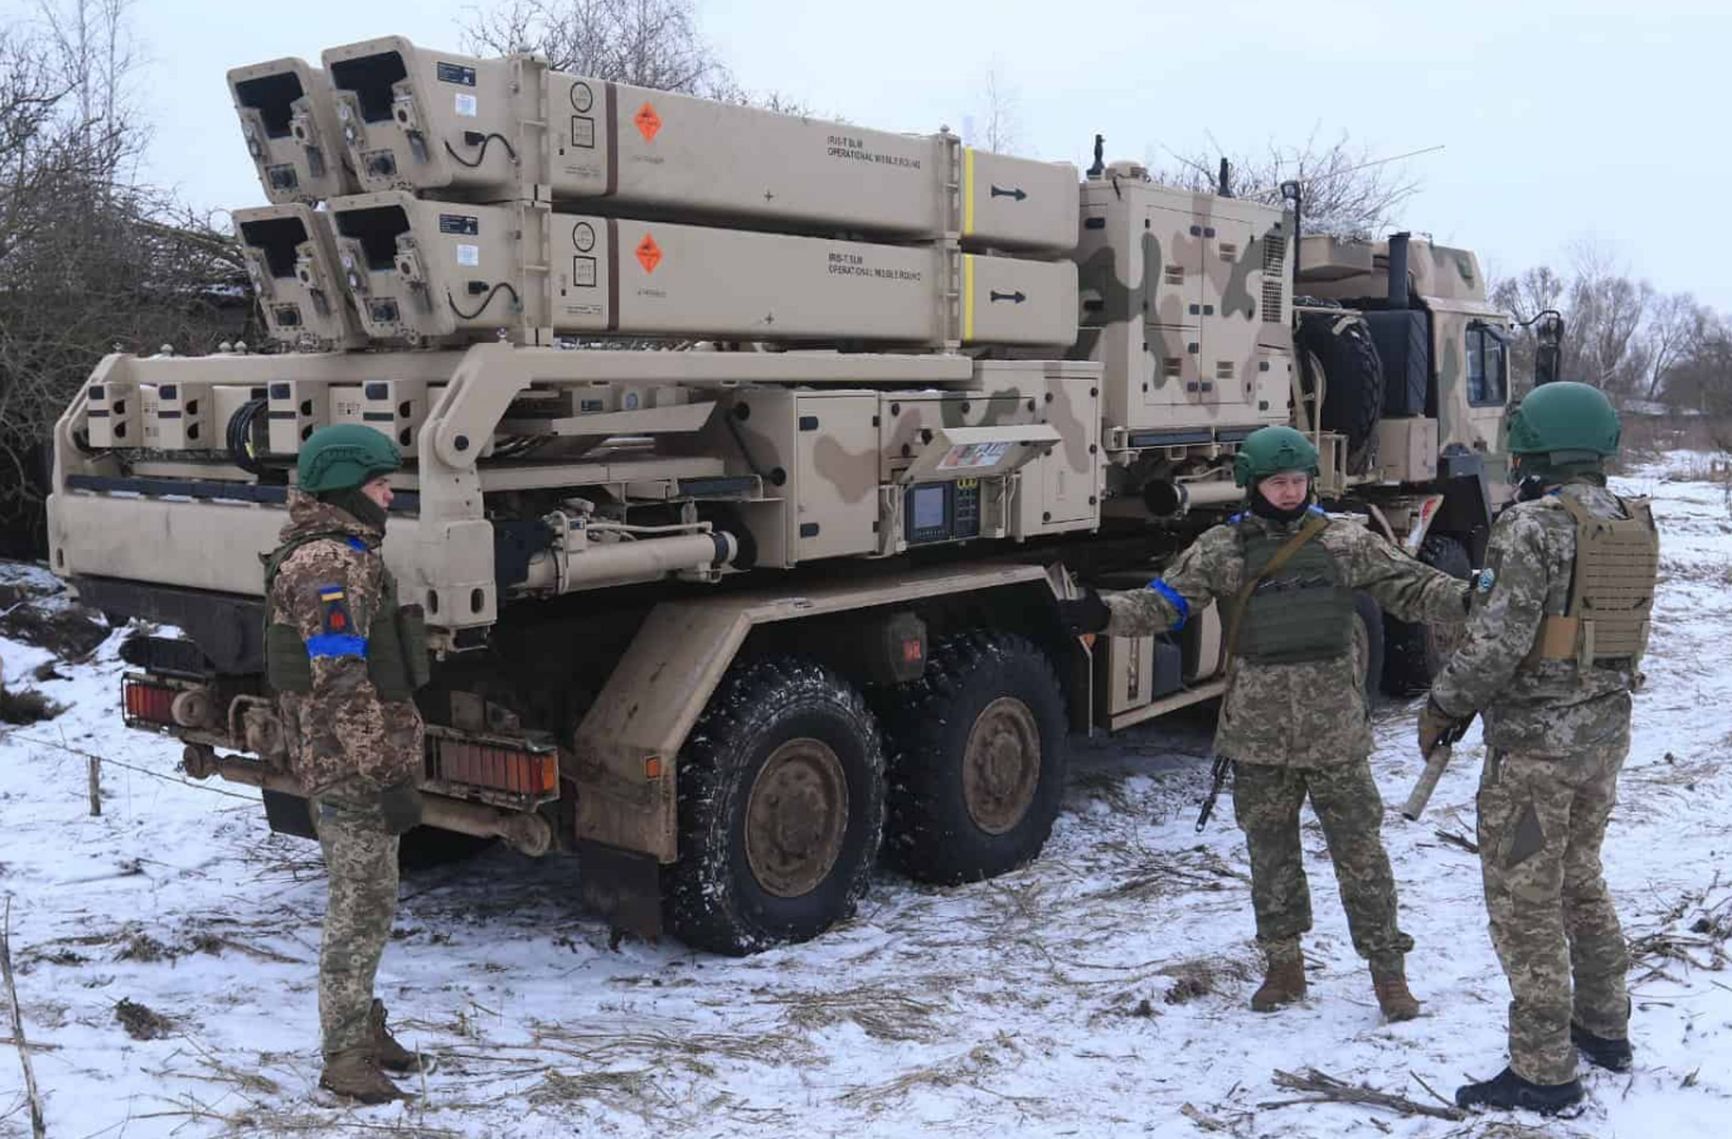 A German IRIS-T air defense system transferred to the Armed Forces of Ukraine, February 2023